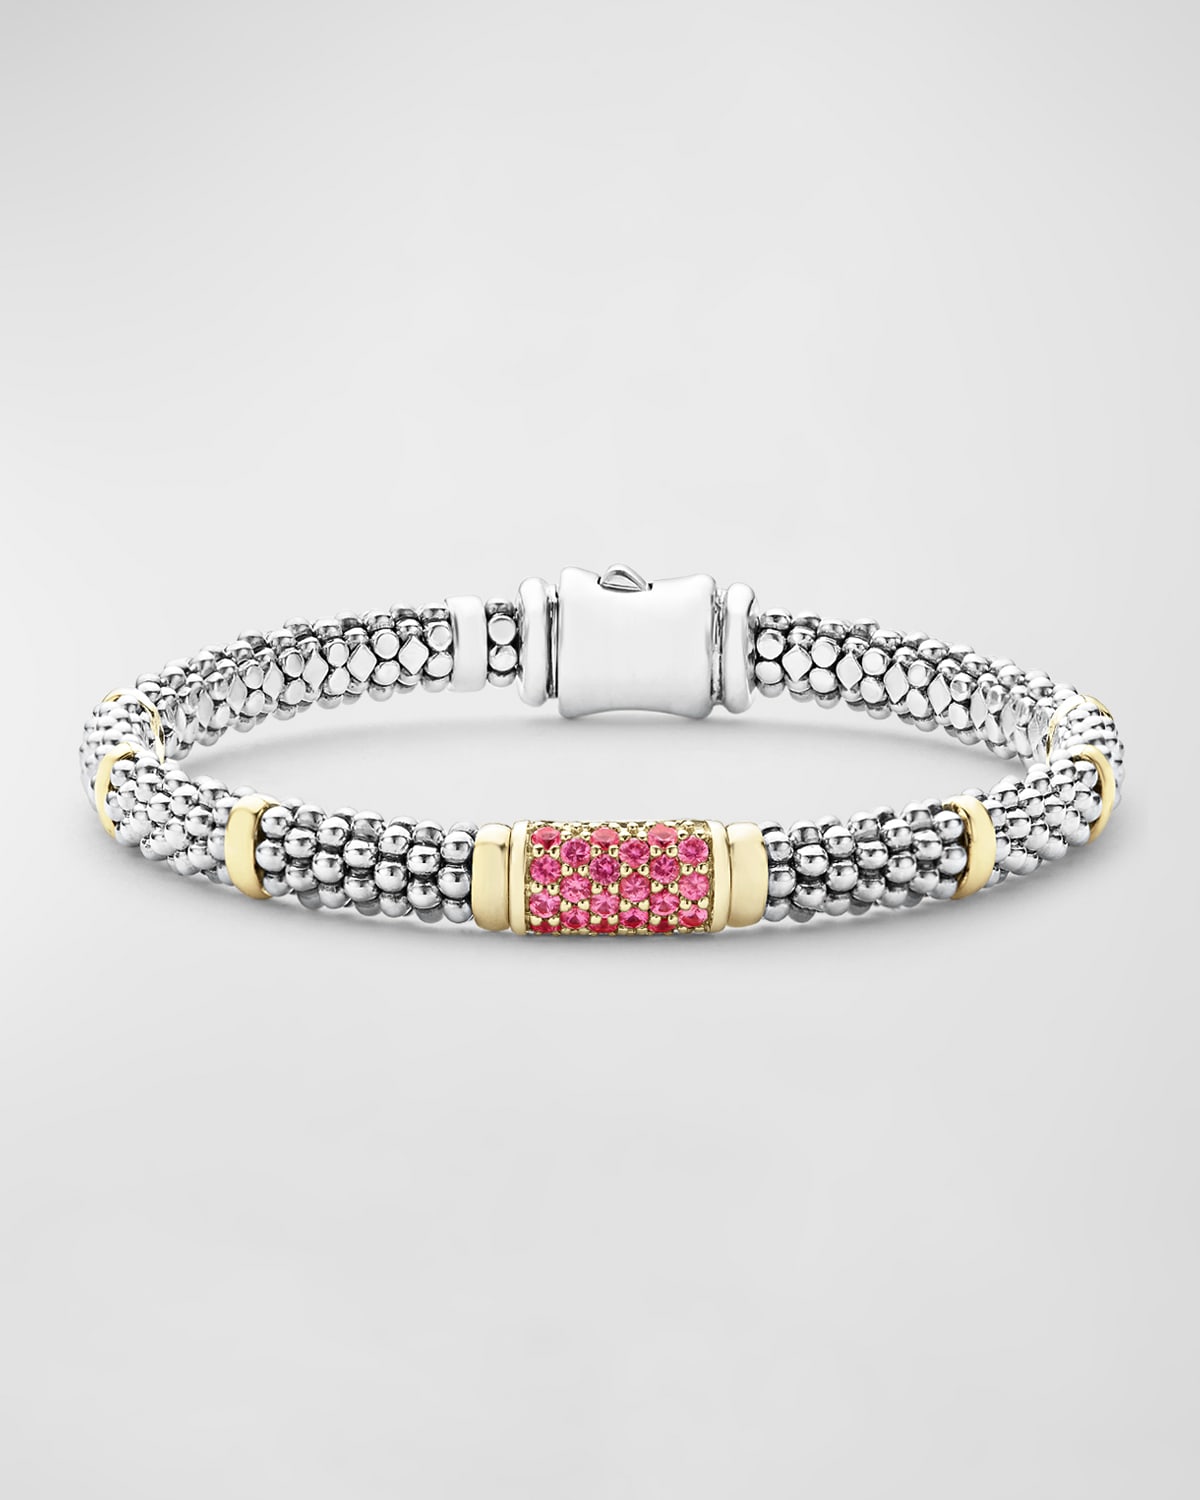 LAGOS 18K GOLD STATIONS ON STERLING SILVER CAVIAR BEAD BRACELET WITH PINK SAPPHIRES. 6MM